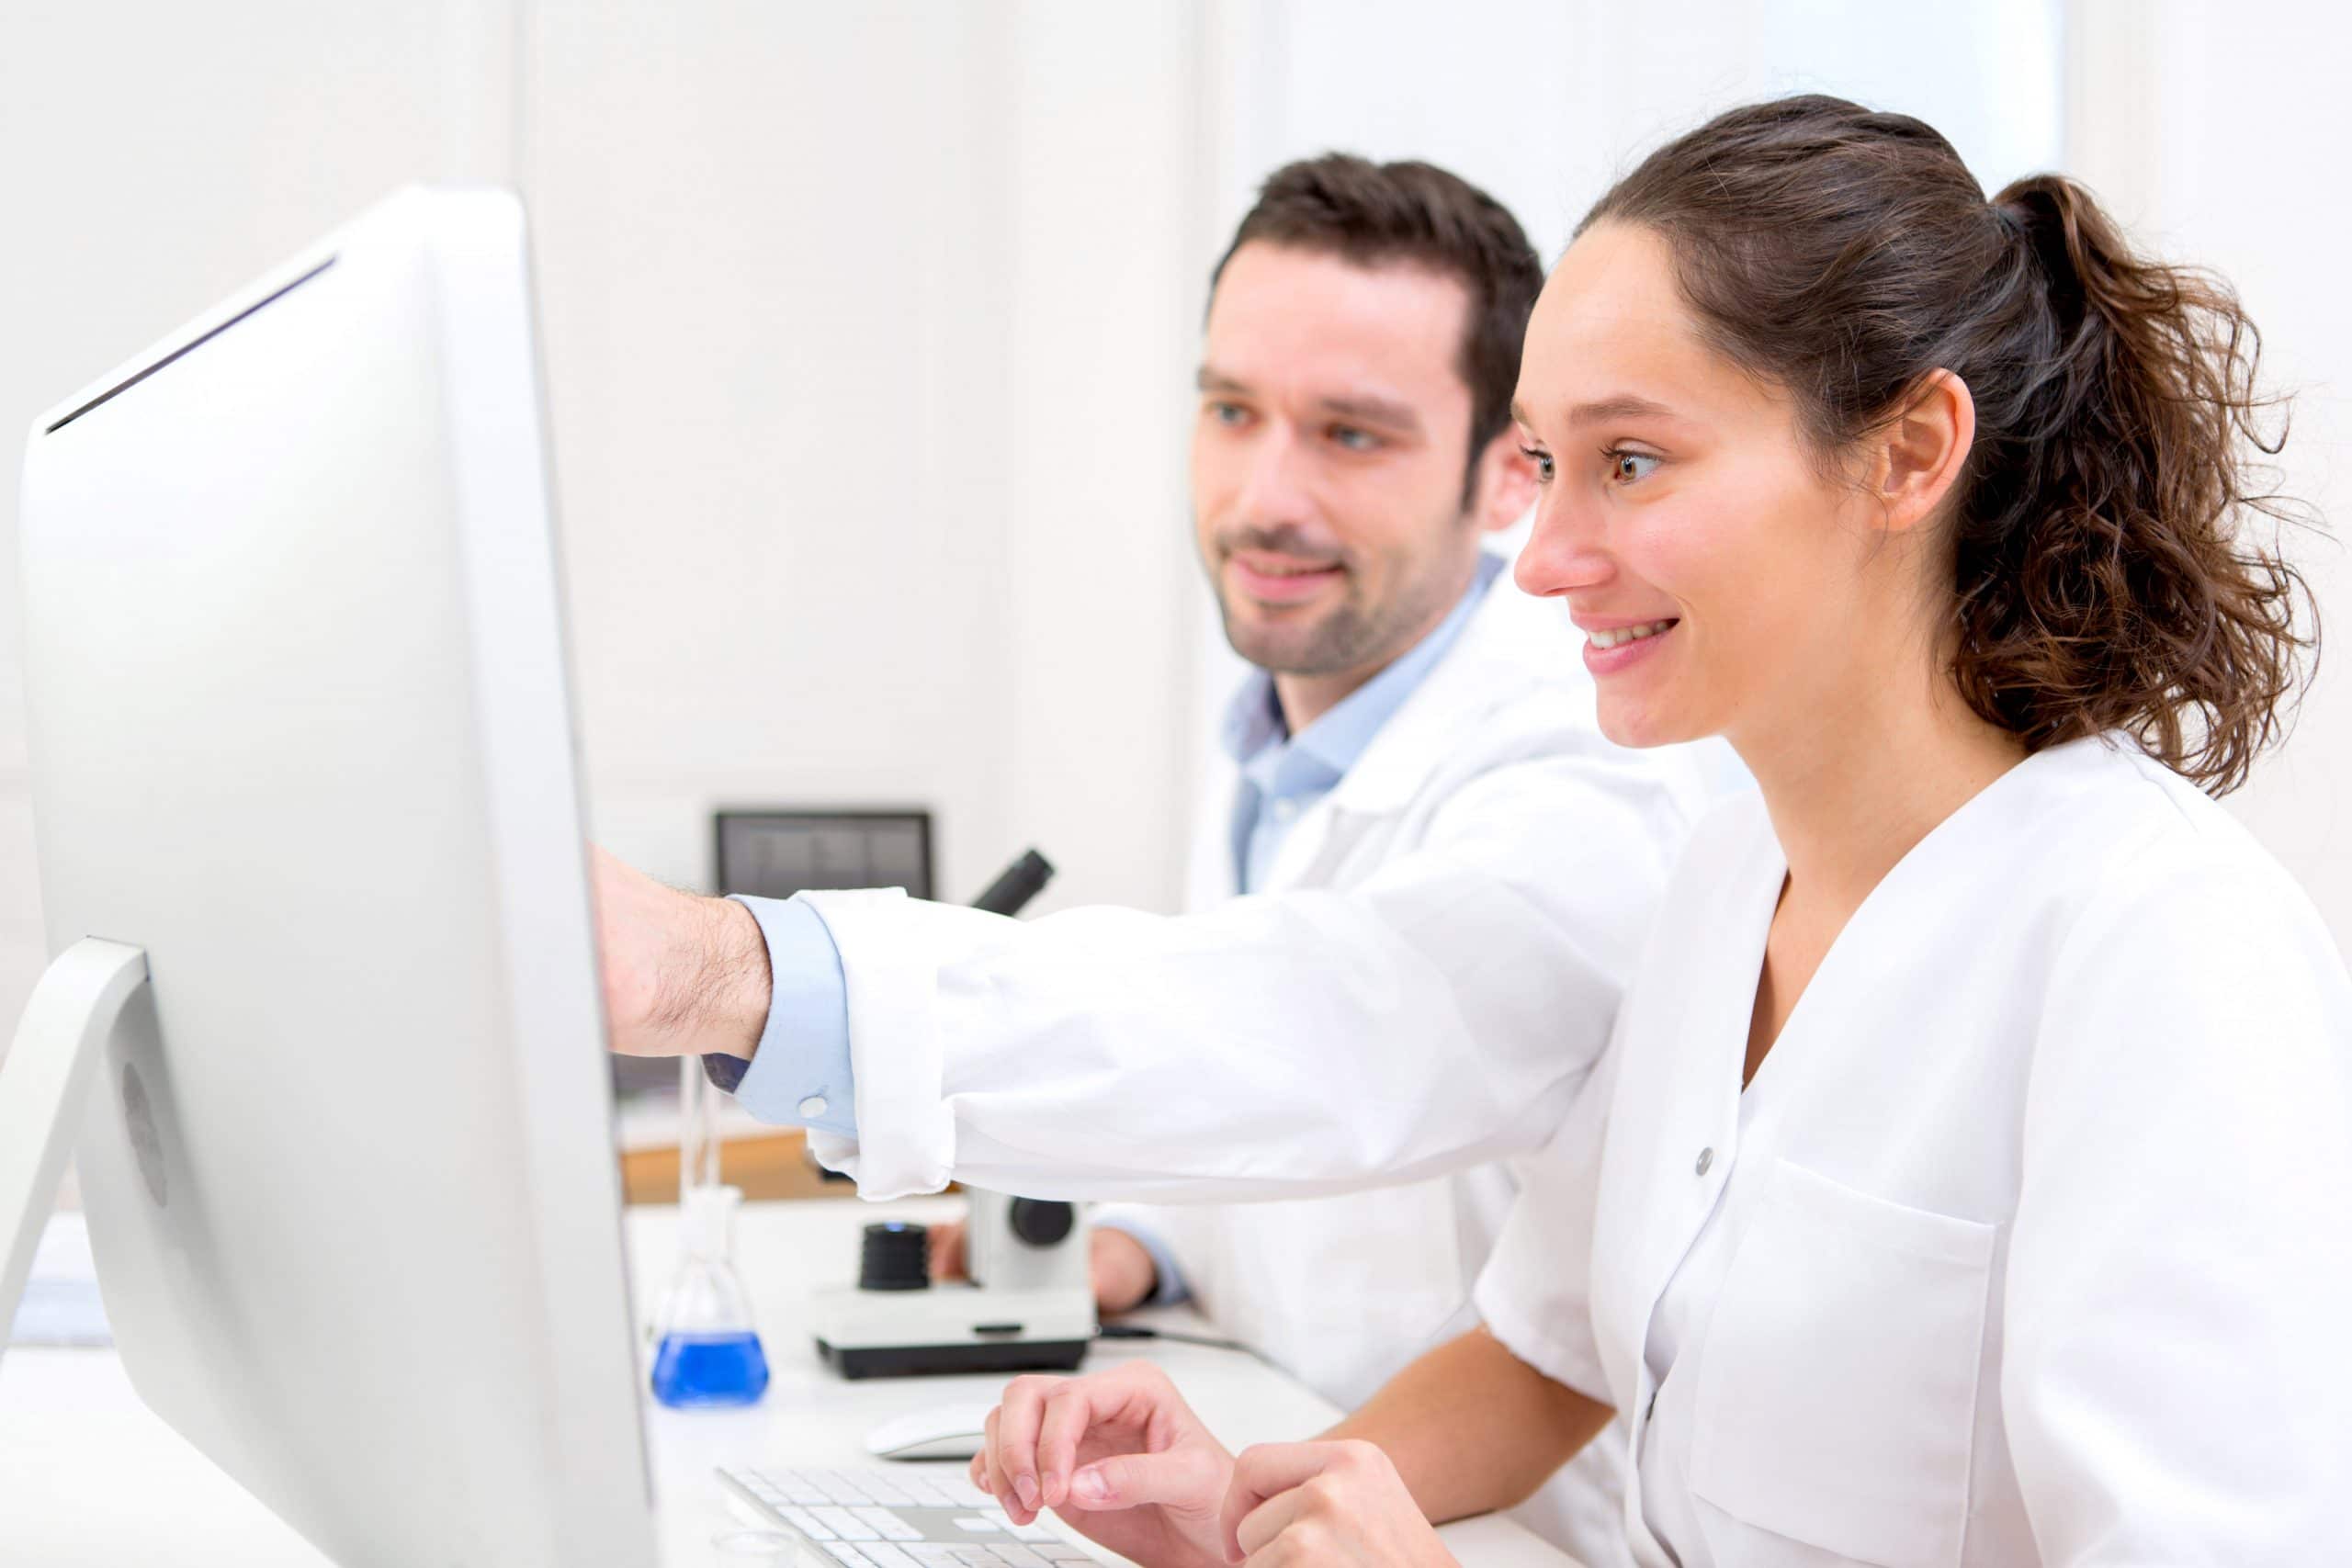 Pharmacist and Pharmacy Technician using a computer to learn together.